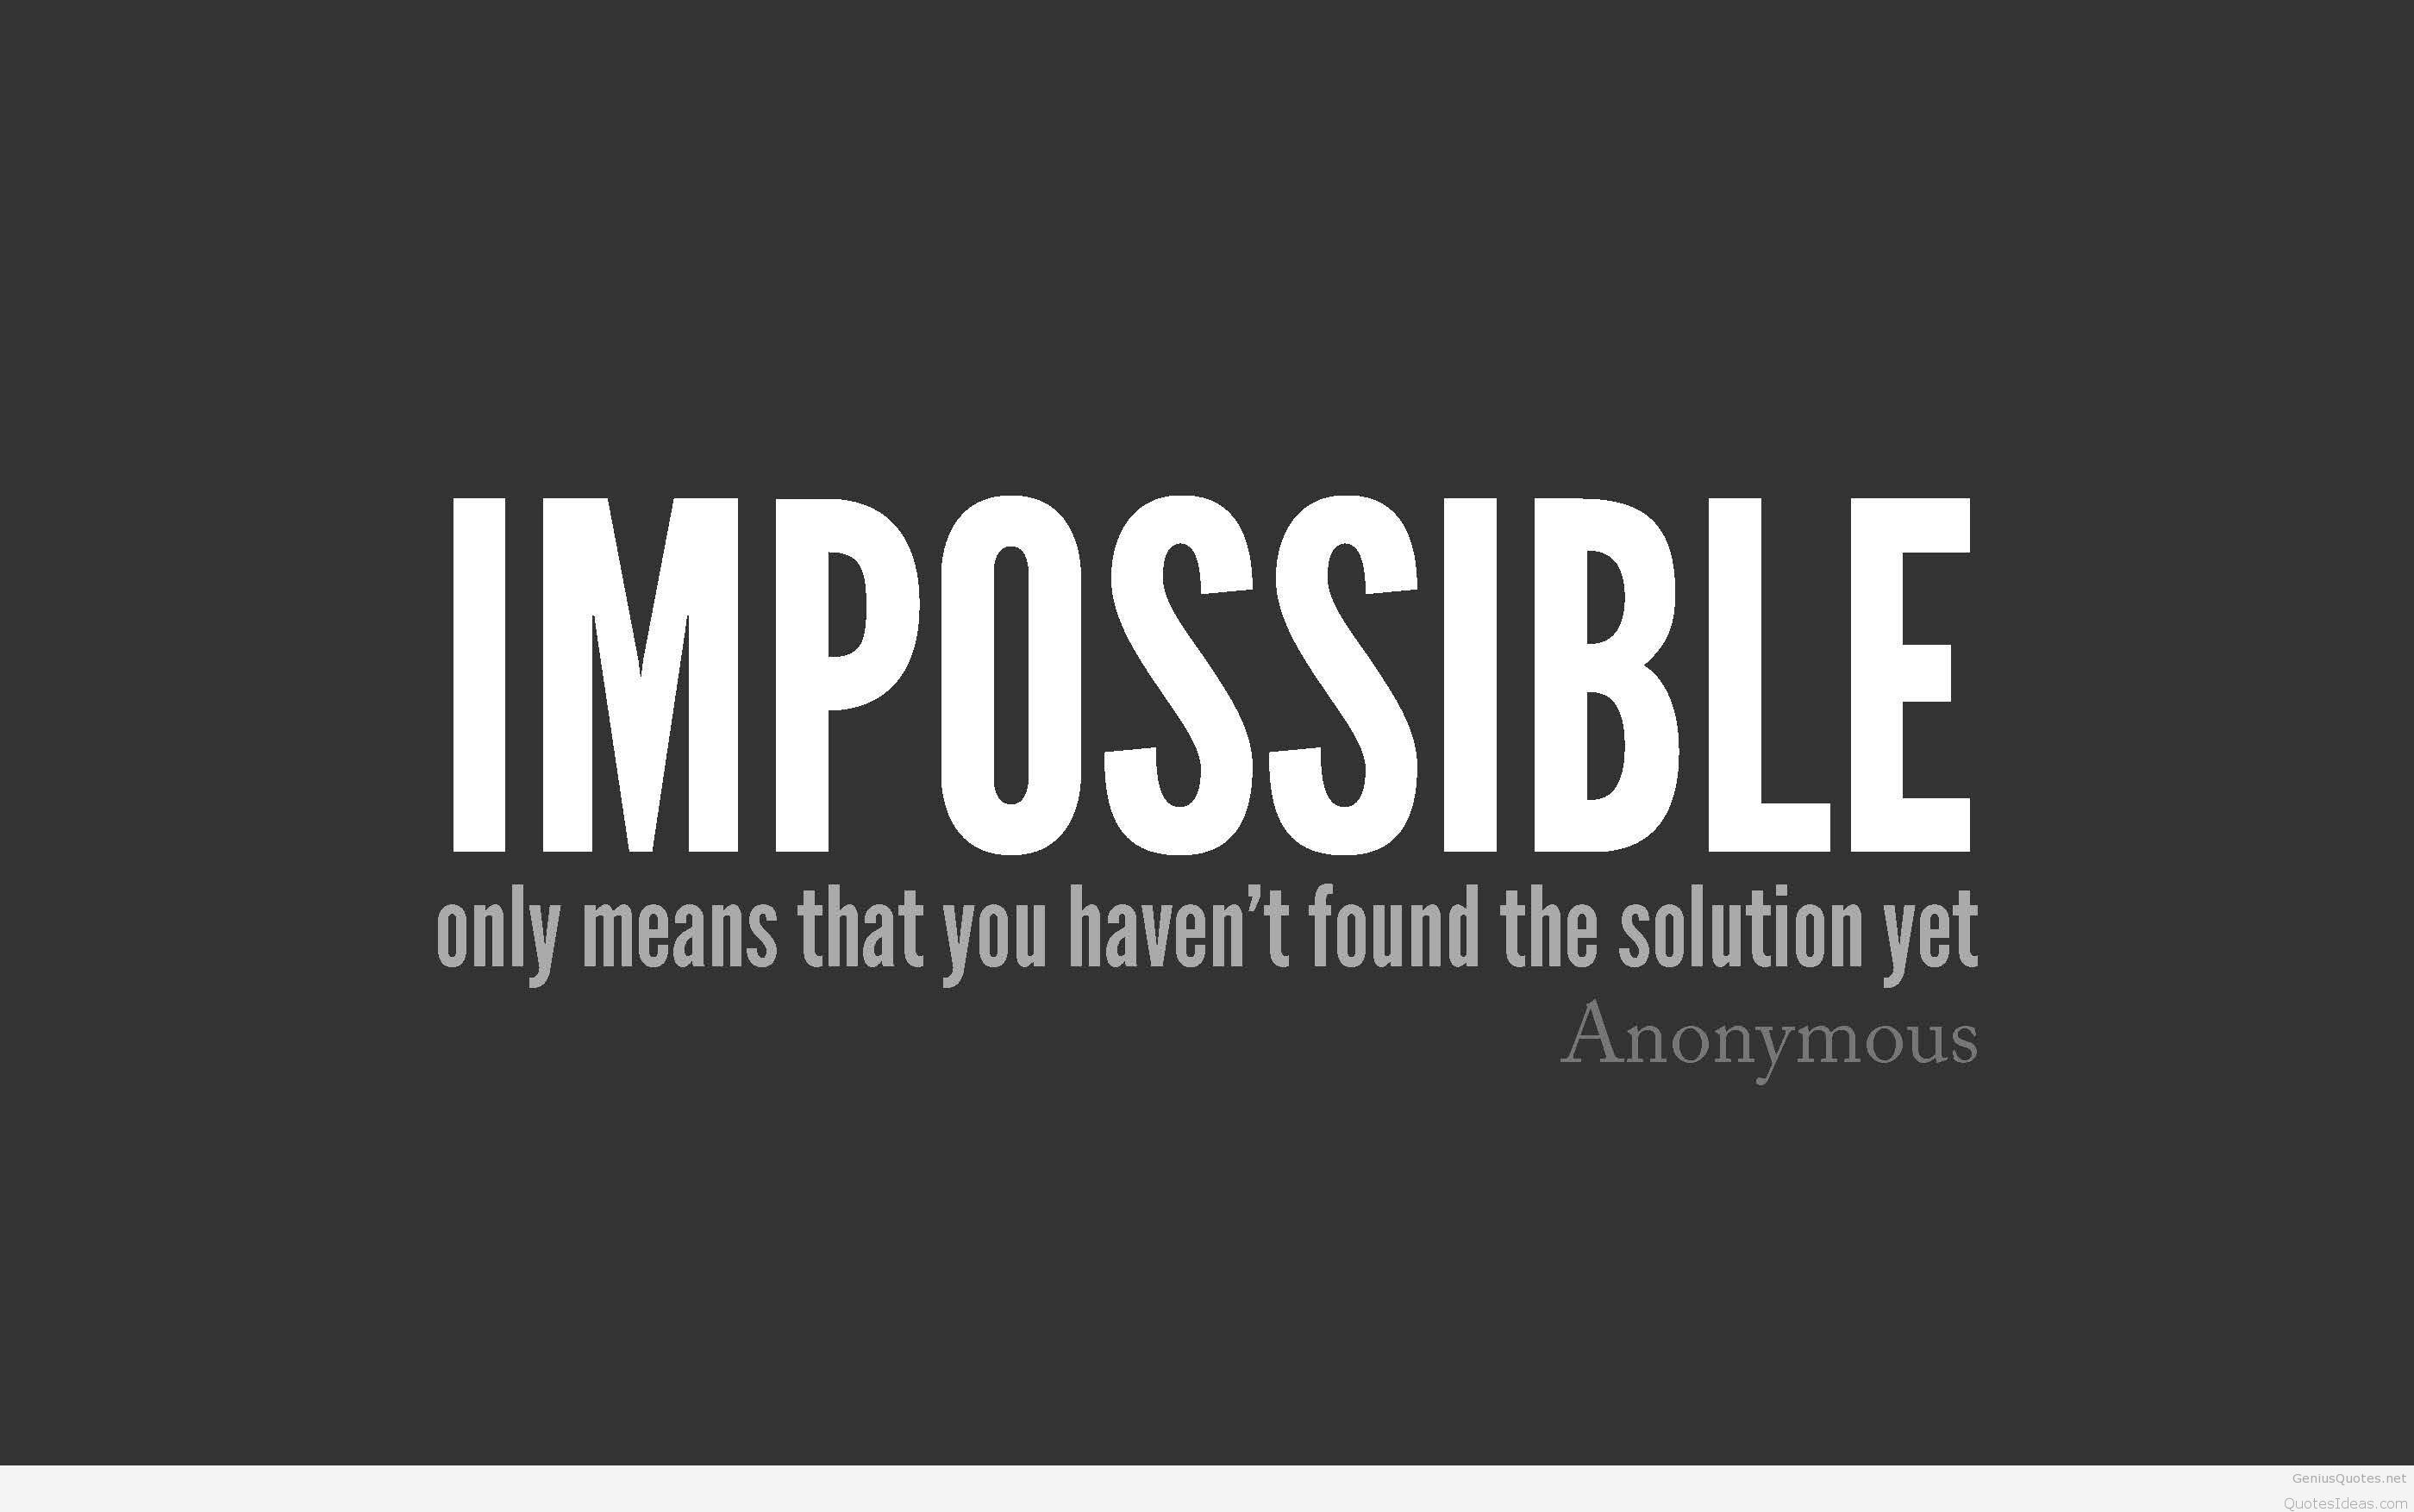 2800x1754 Wallpaper business impossible quote hd